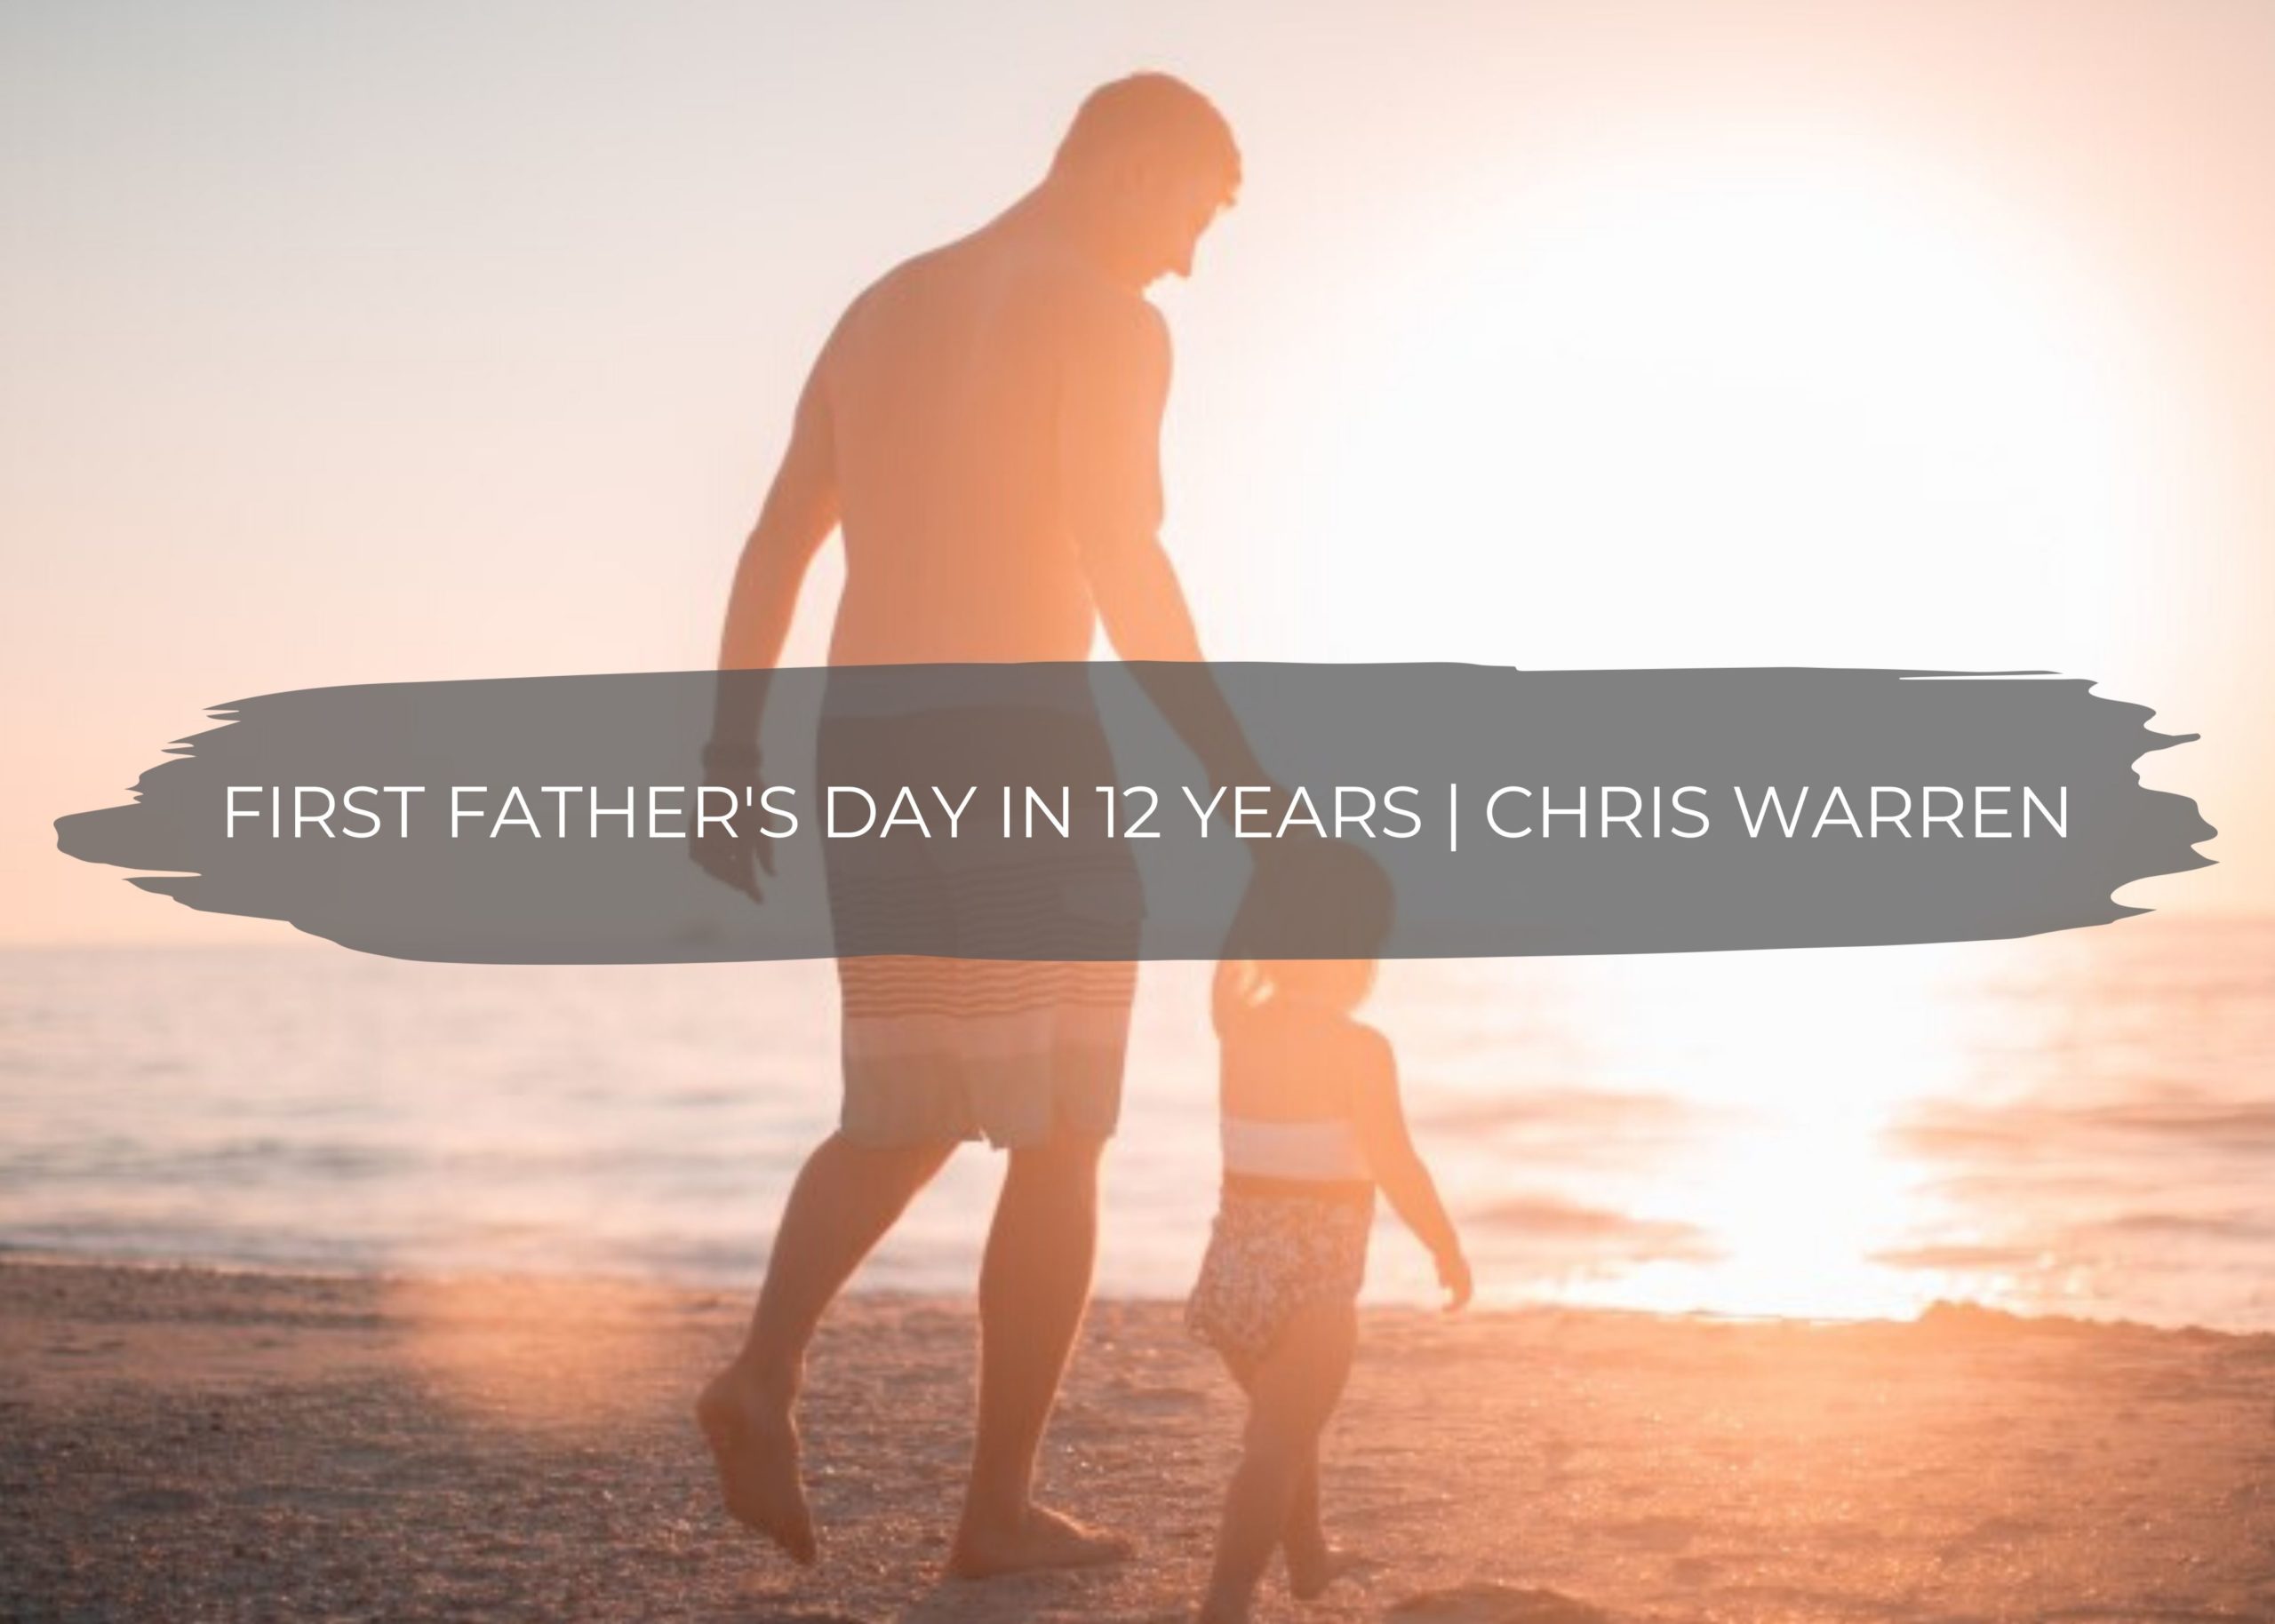 First Father's Day In 12 Years | Chris Warren 1